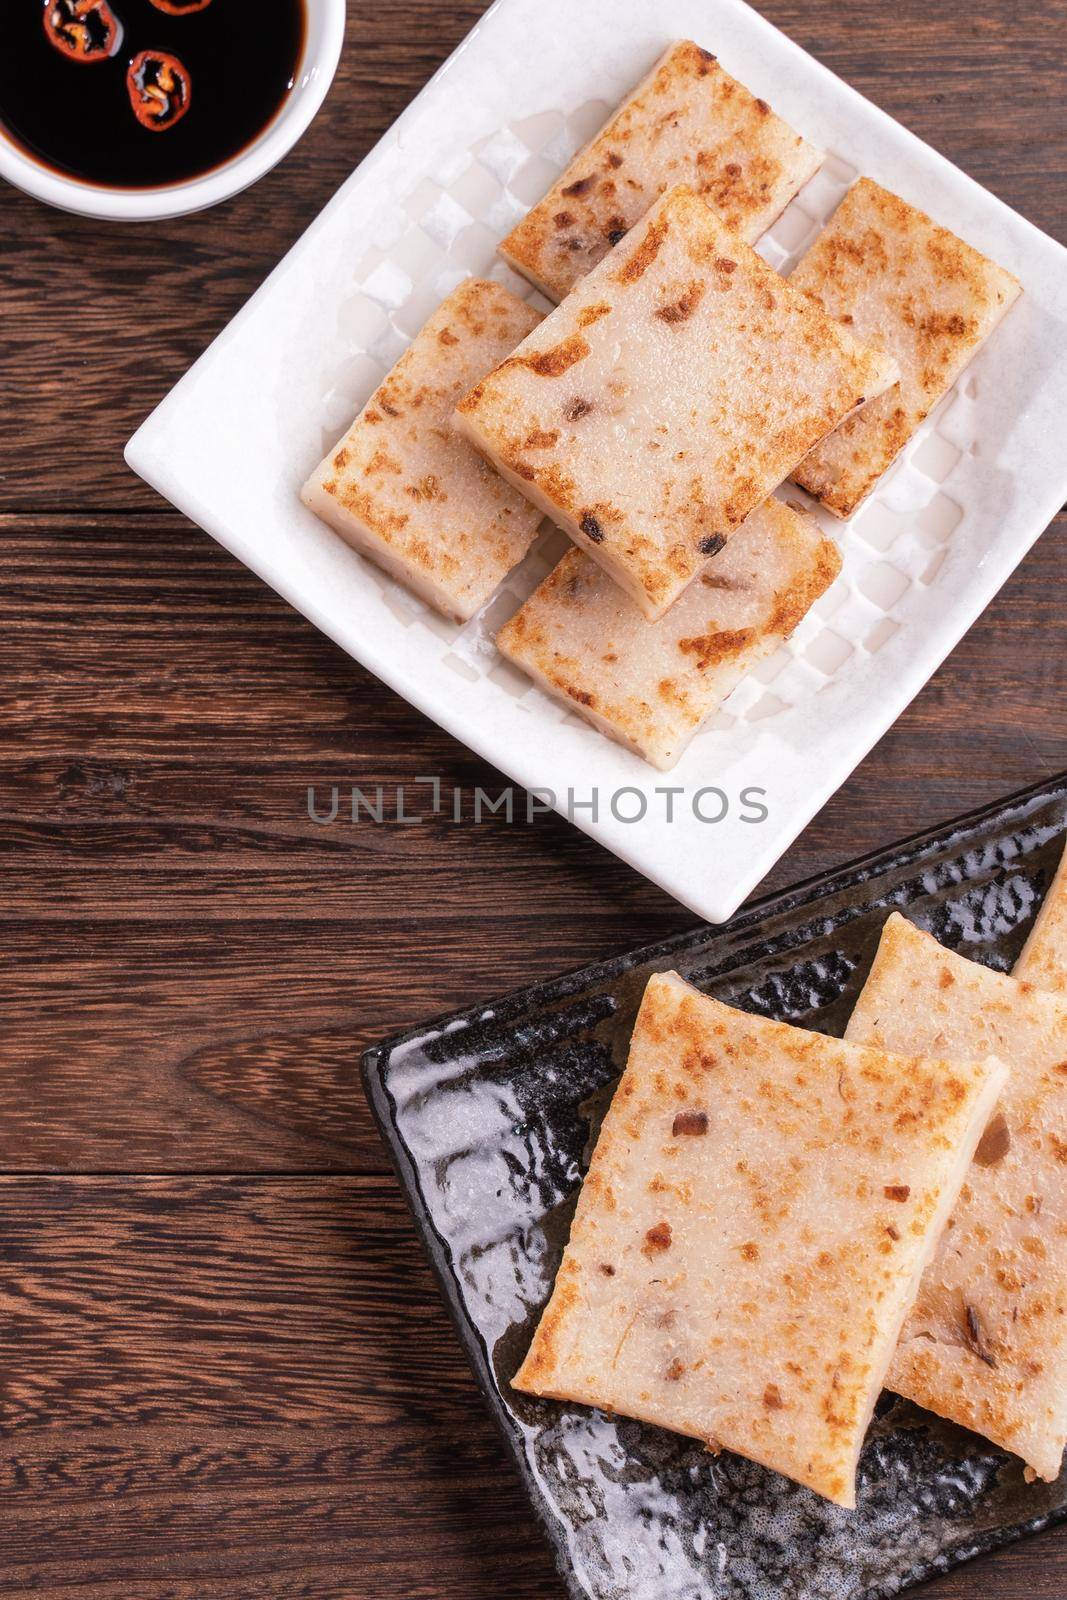 Delicious turnip cake, Chinese traditional radish cake in restaurant with soy sauce for new year's dishes, close up, copy space, top view, flat lay.